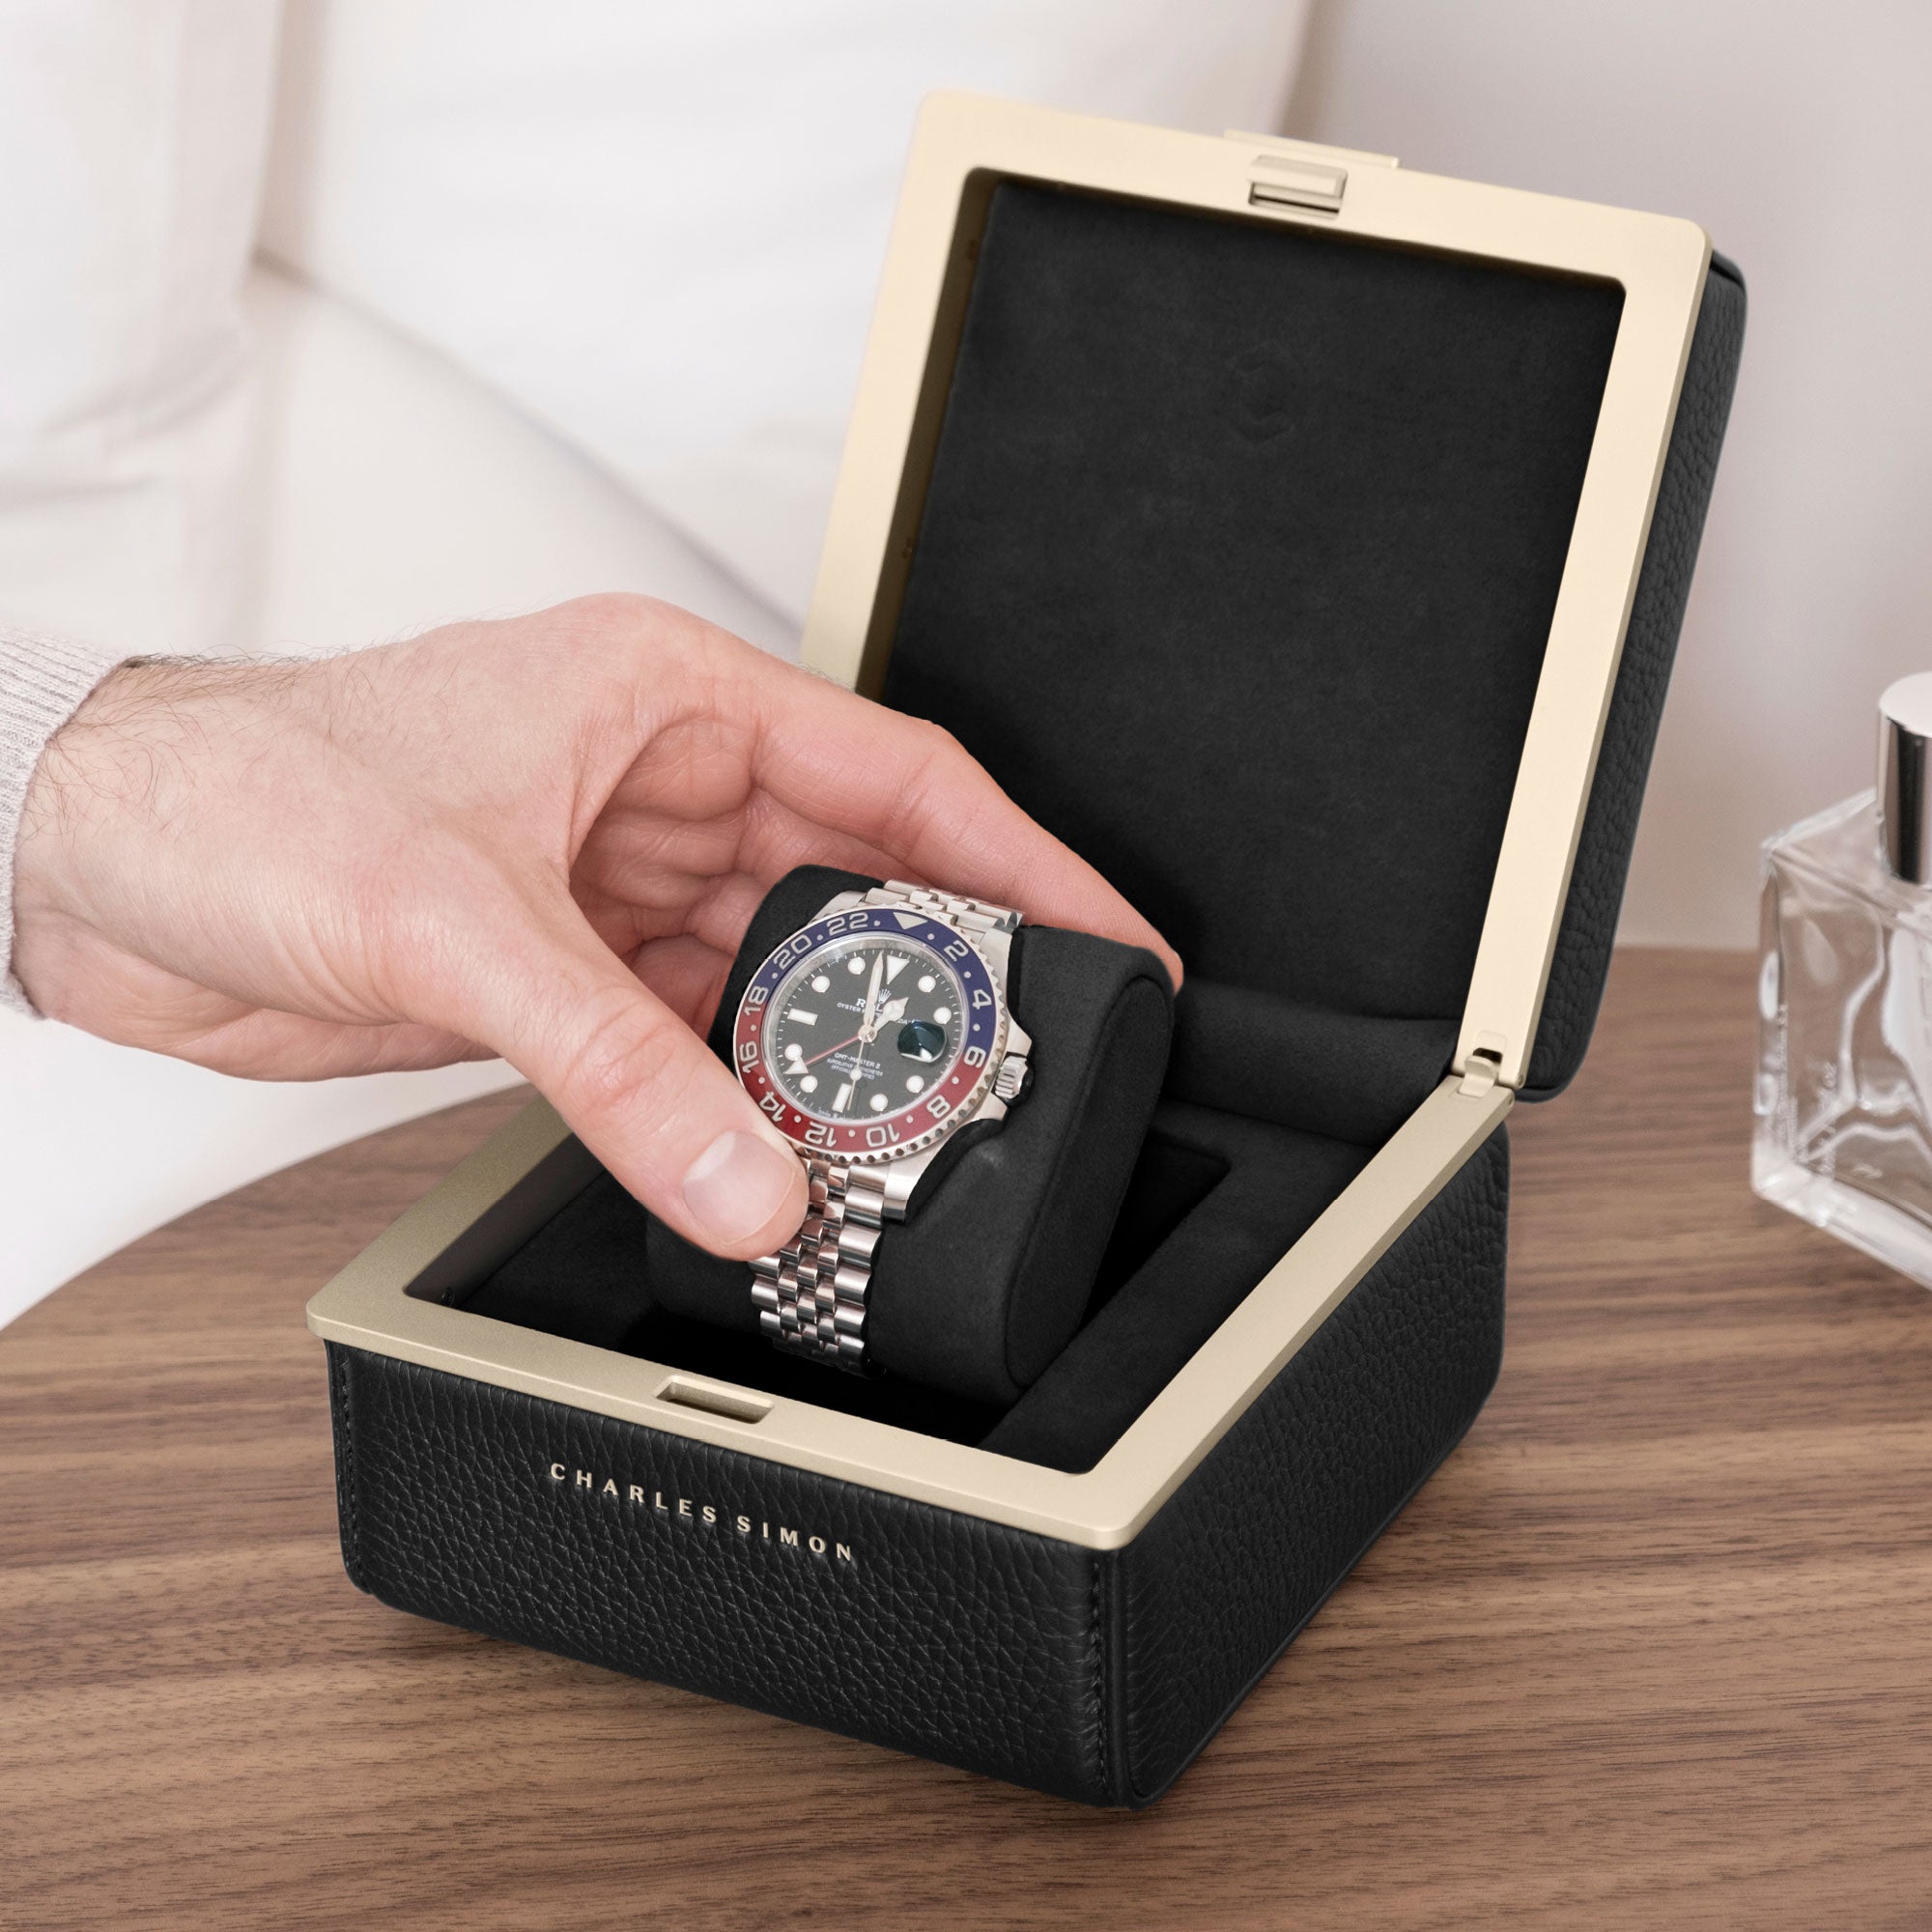 Man taking his luxury watch from the removable black cushion of the gold Eaton 1 watch case by Charles Simon.